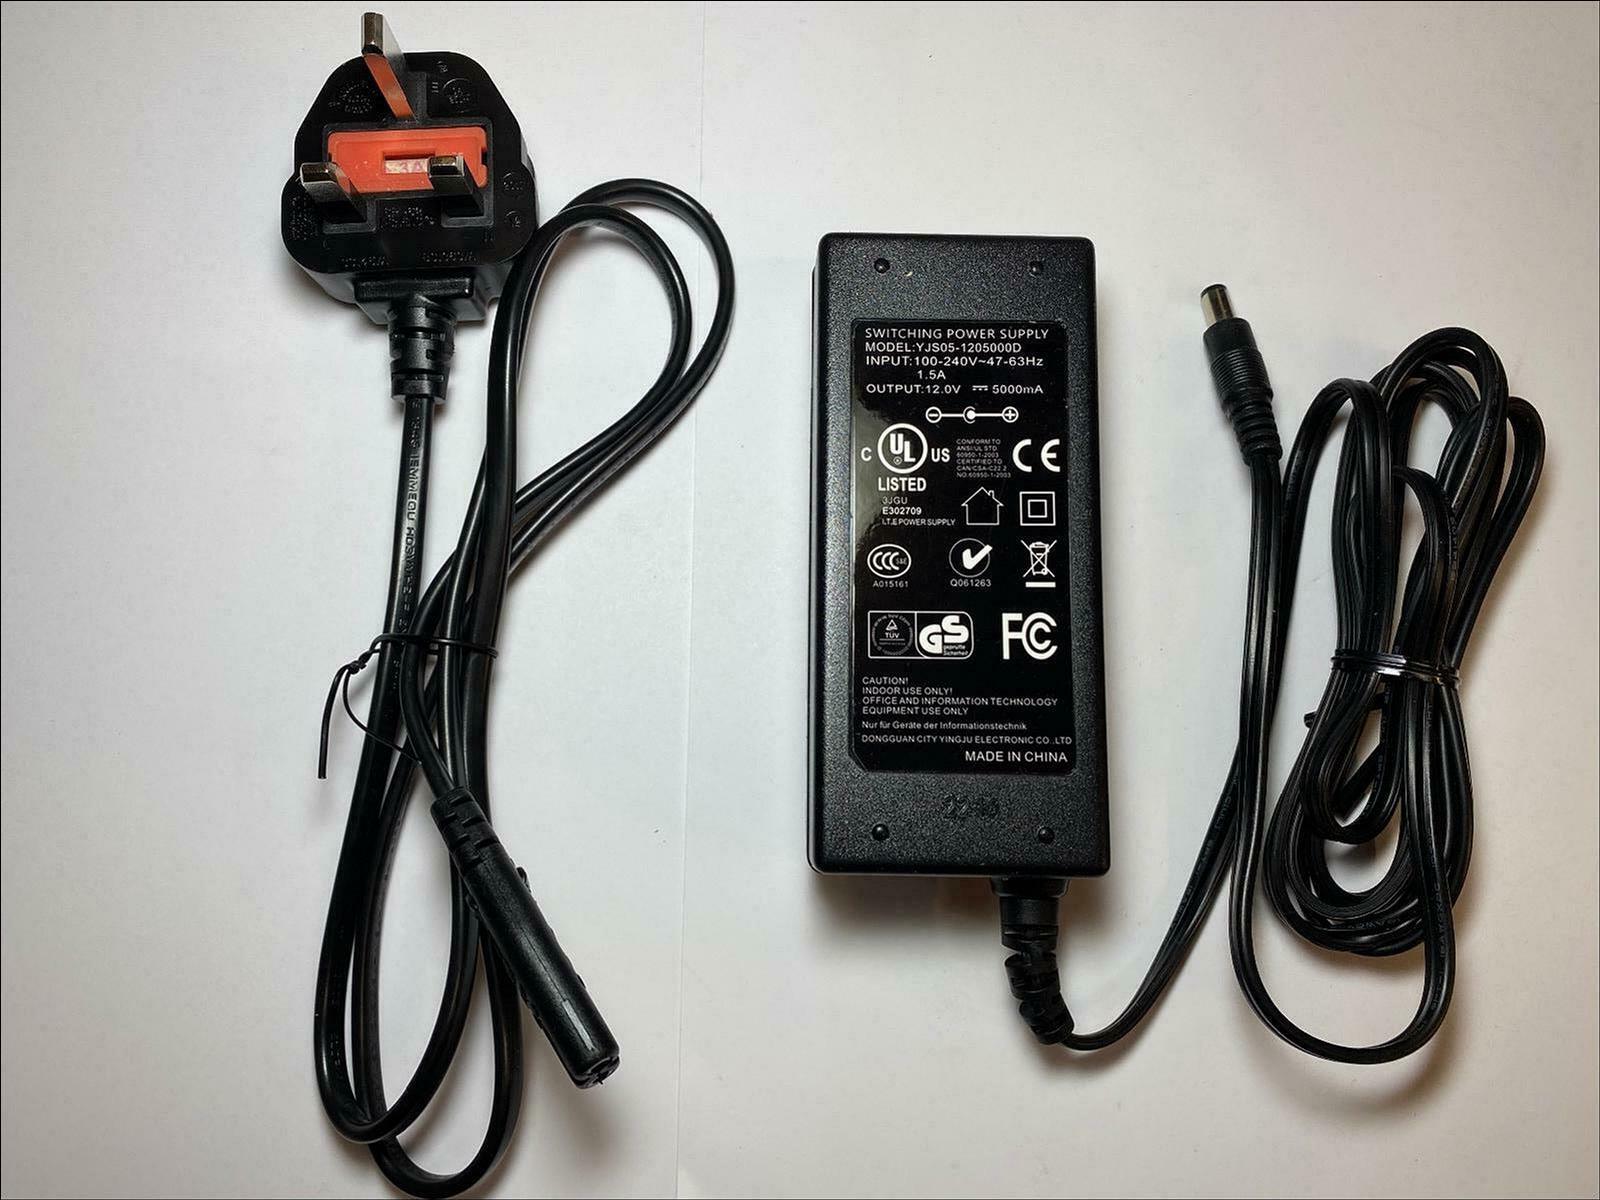 UK Replacement for 12V 4A 12.0V 4.0A BOSS ROLAND PSB-7U PSU PART AC-DC Adapter Type: Power Adapter Max. Output Power: